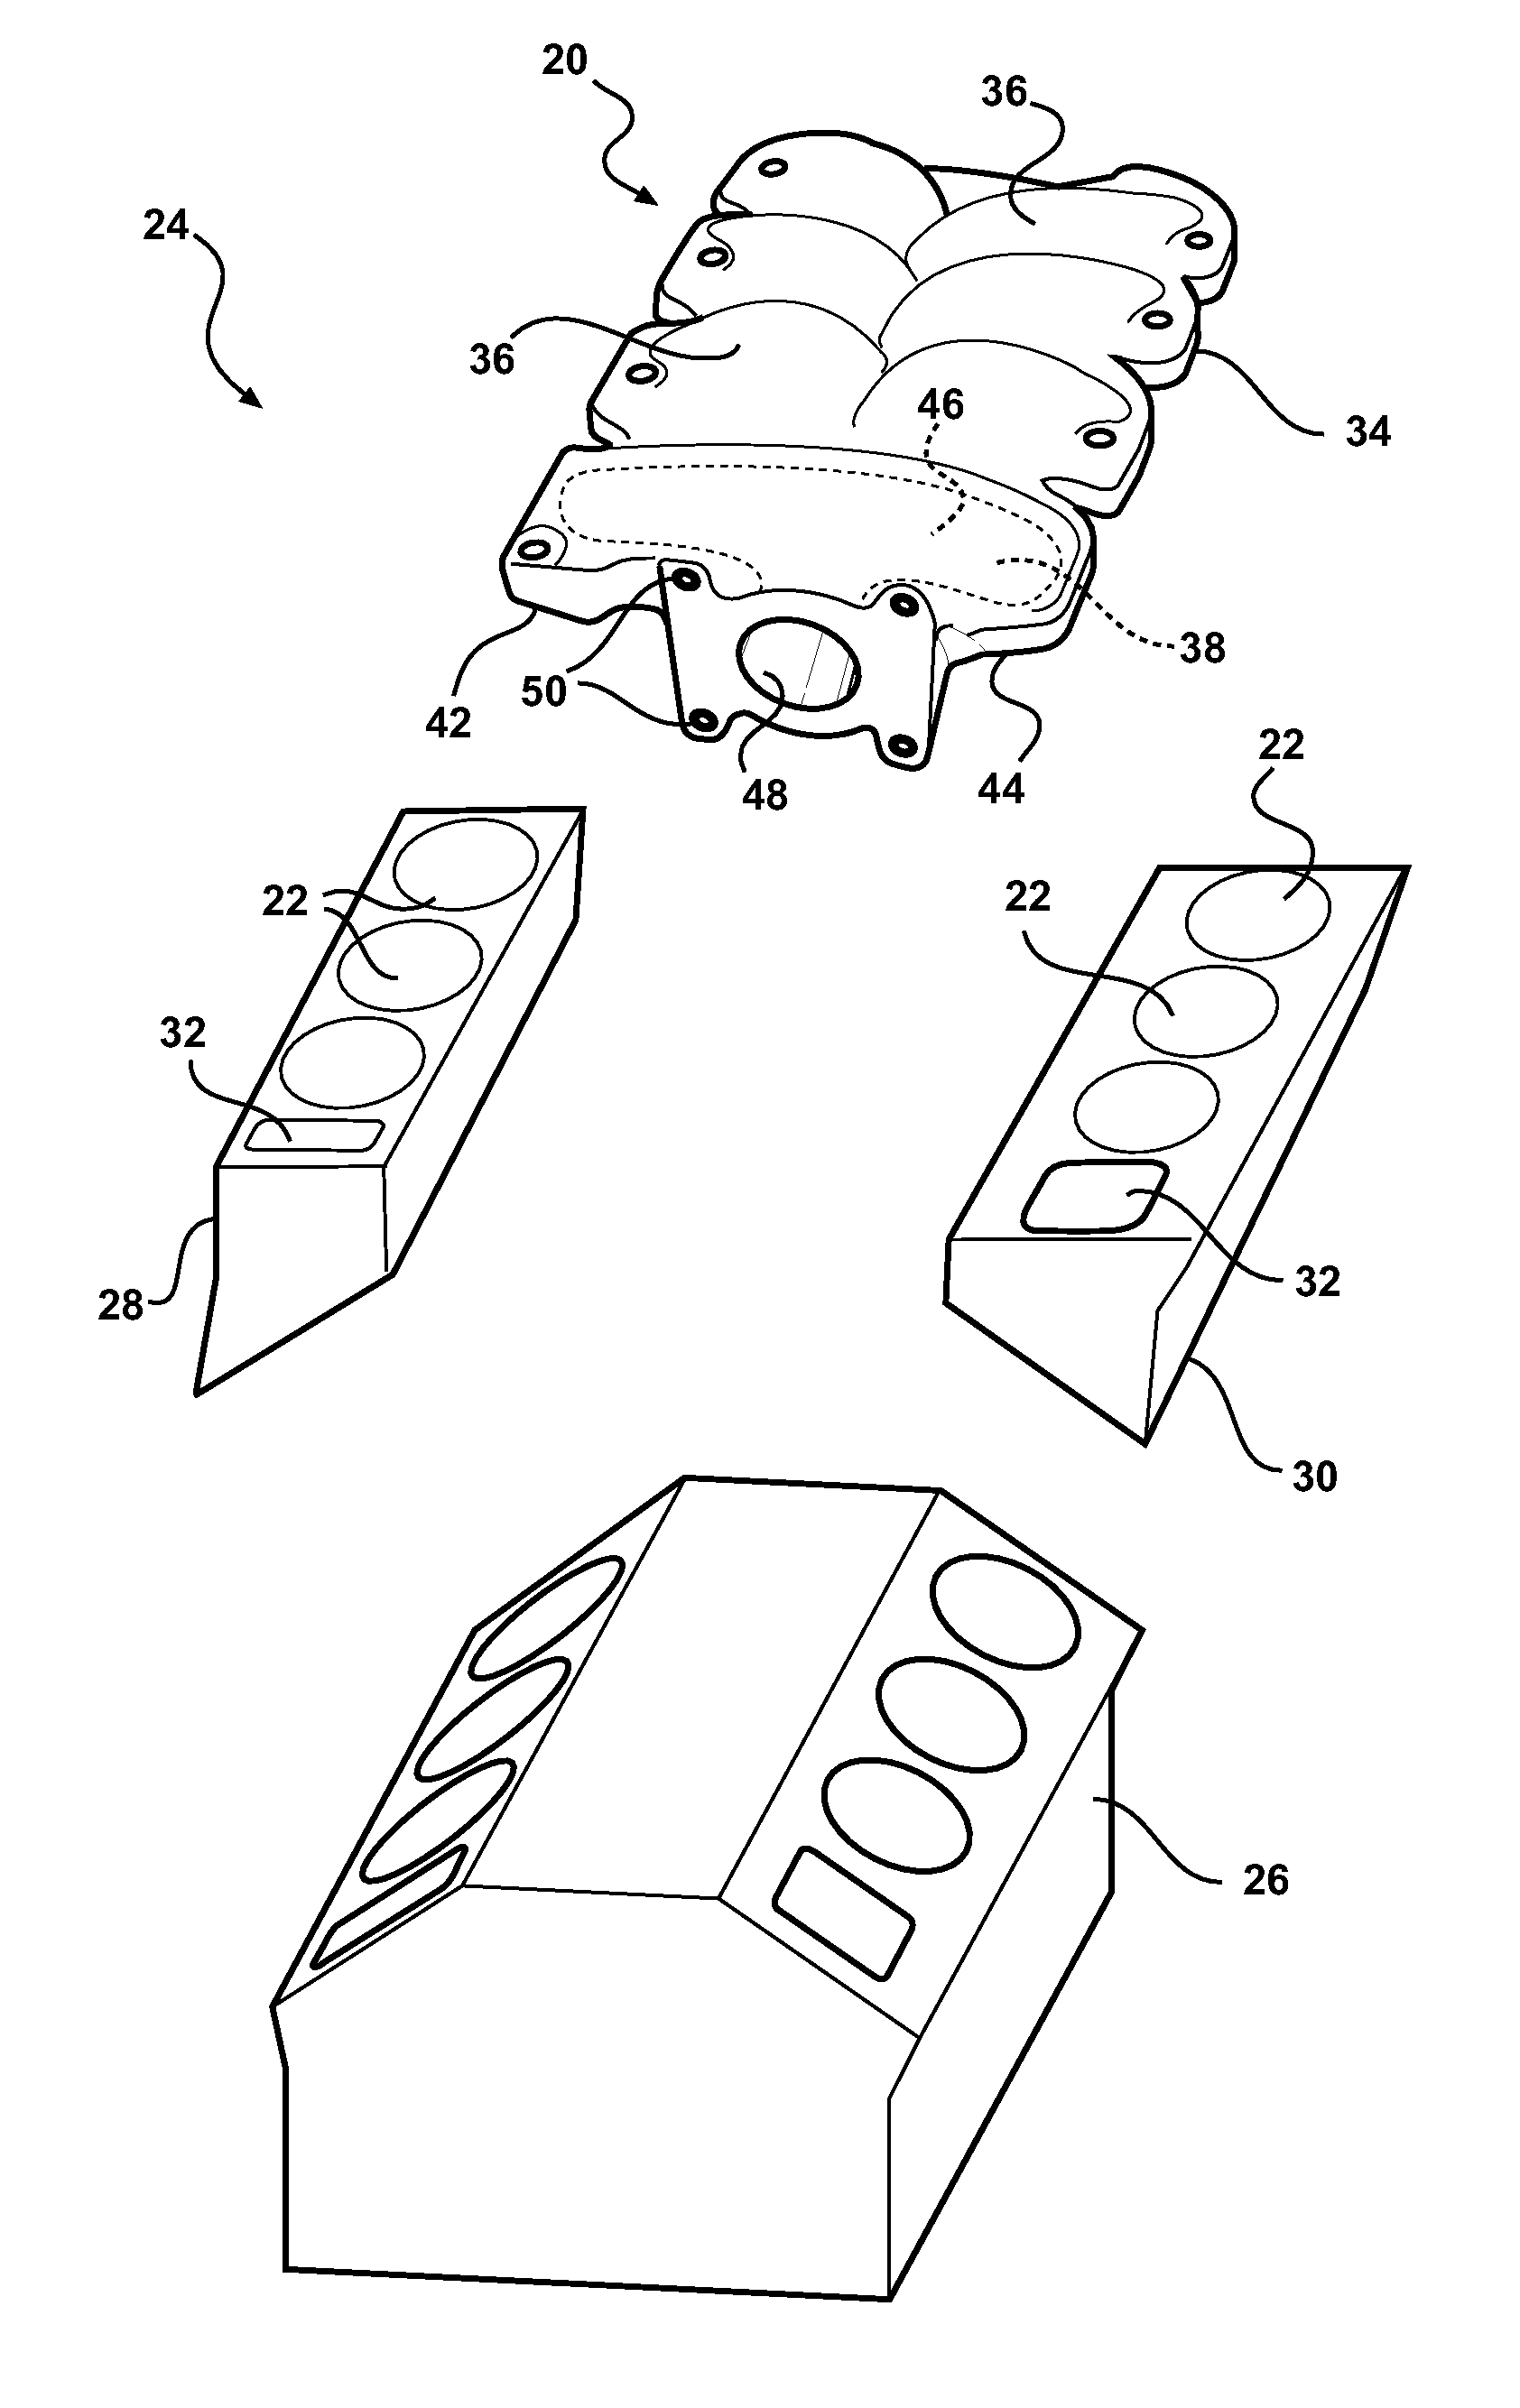 Polyphenylene Sulfide Sleeve In A Nylon Coolant Cross-Over Of An Air Intake Manifold